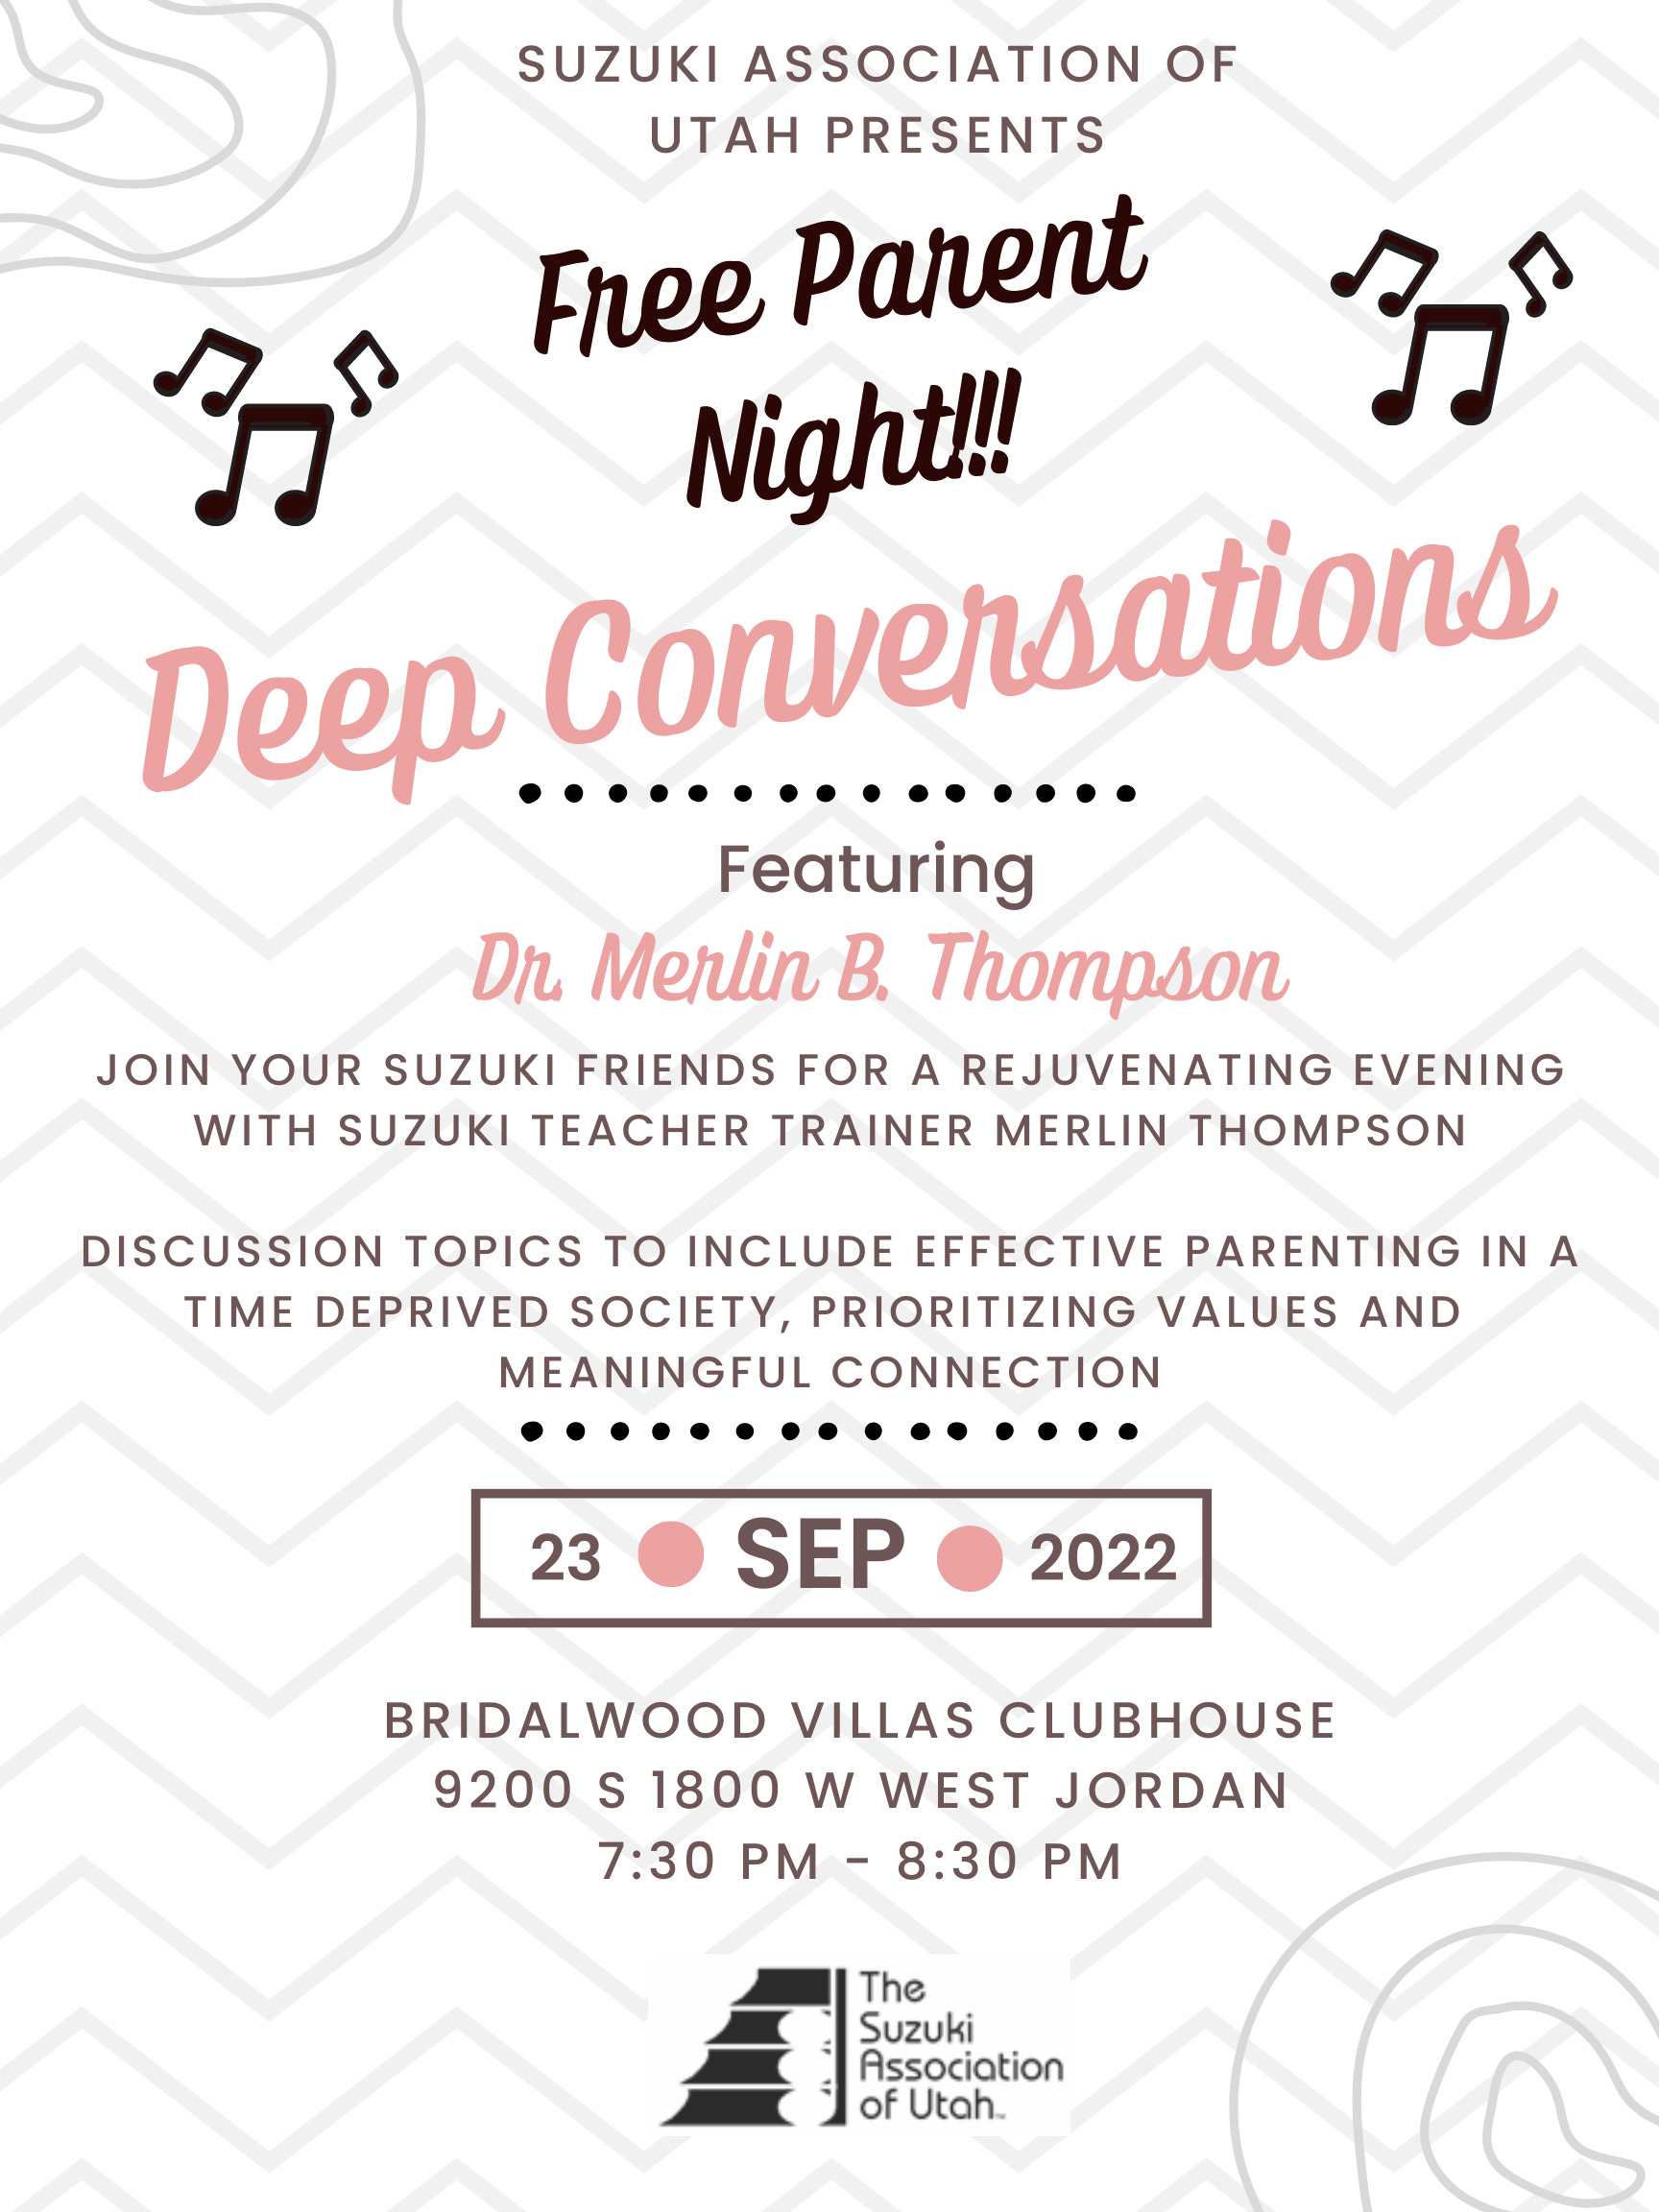 Free Parent Night: "Deep Conversations" with Dr. Merlin B. Thompson